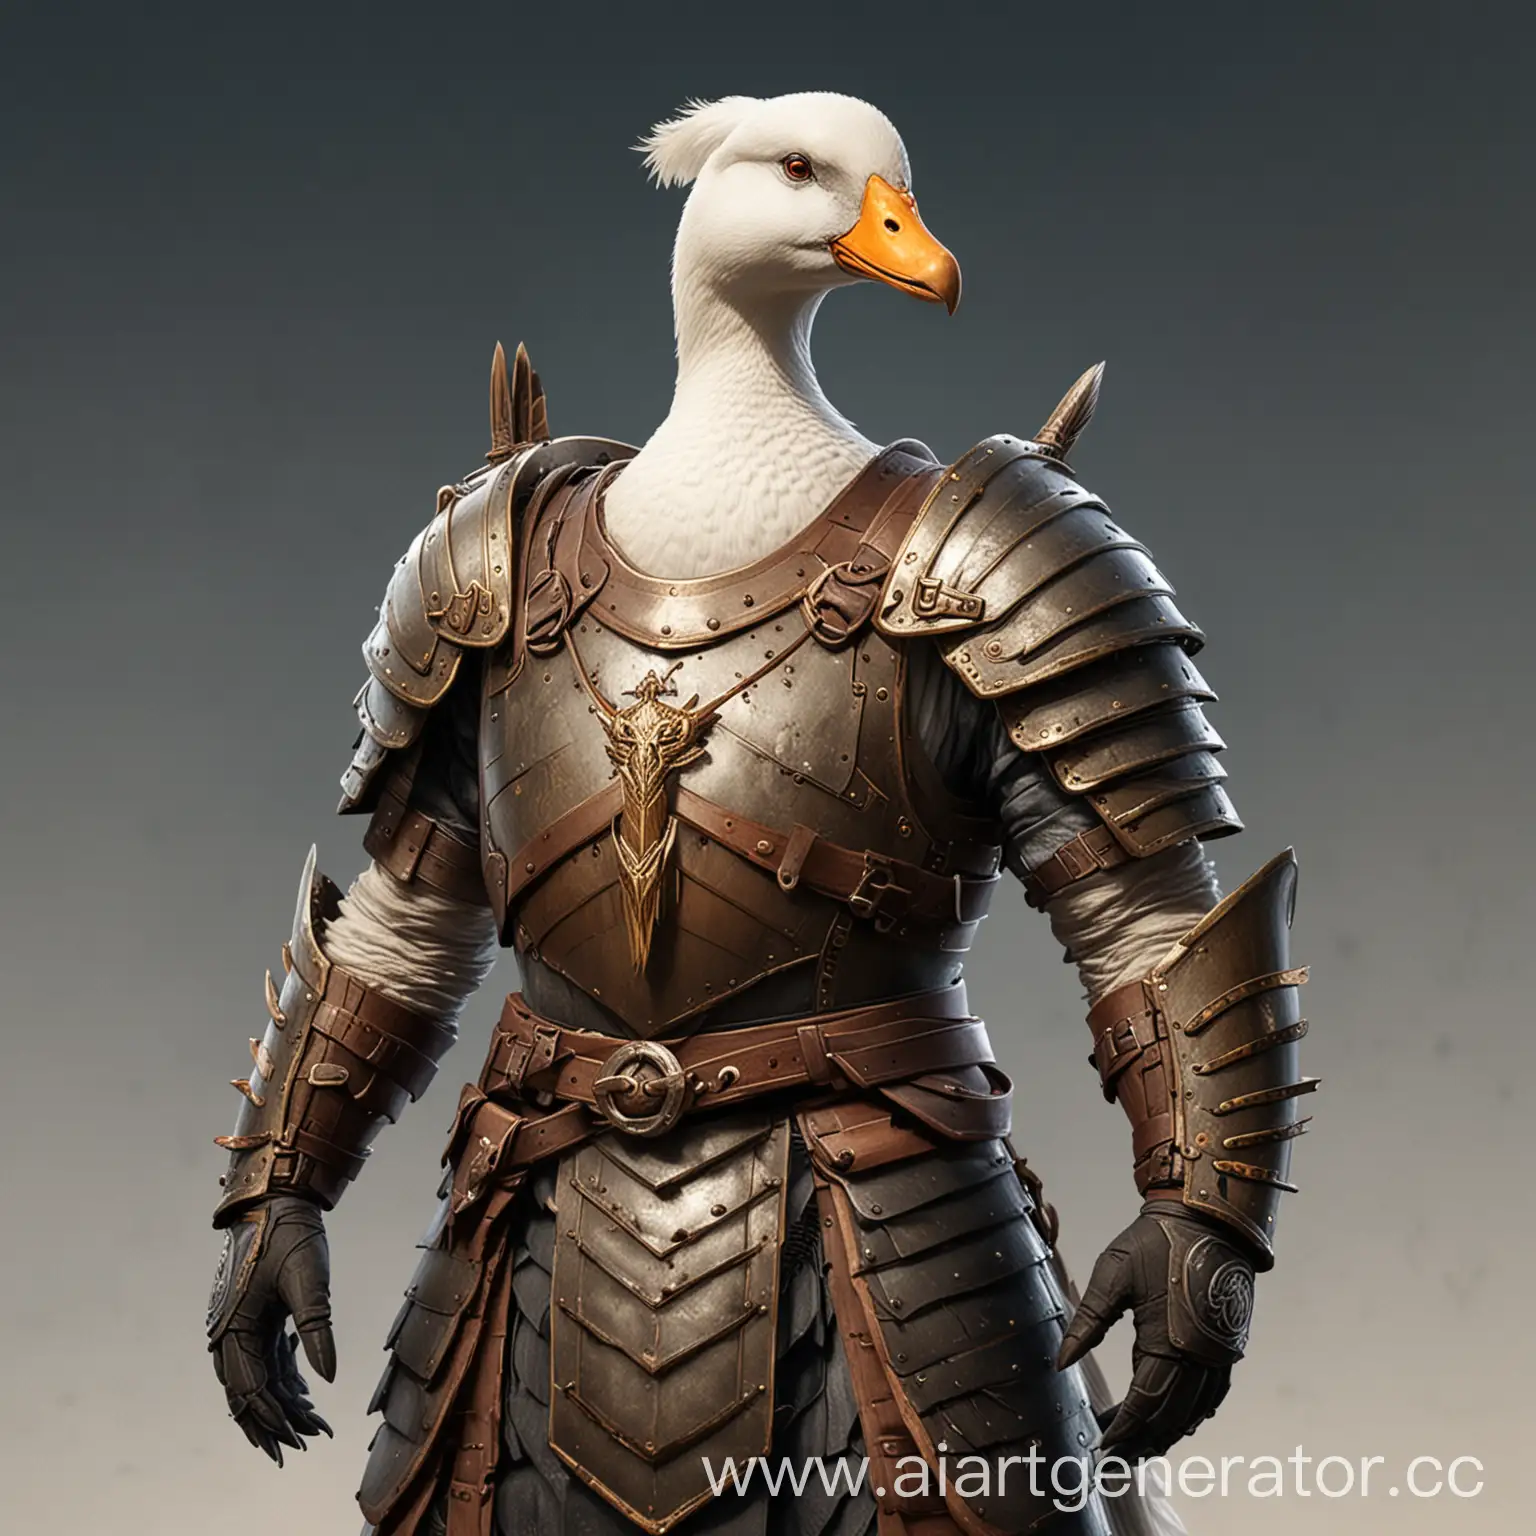 Armored-Warrior-Goose-Icon-Defending-the-Realm